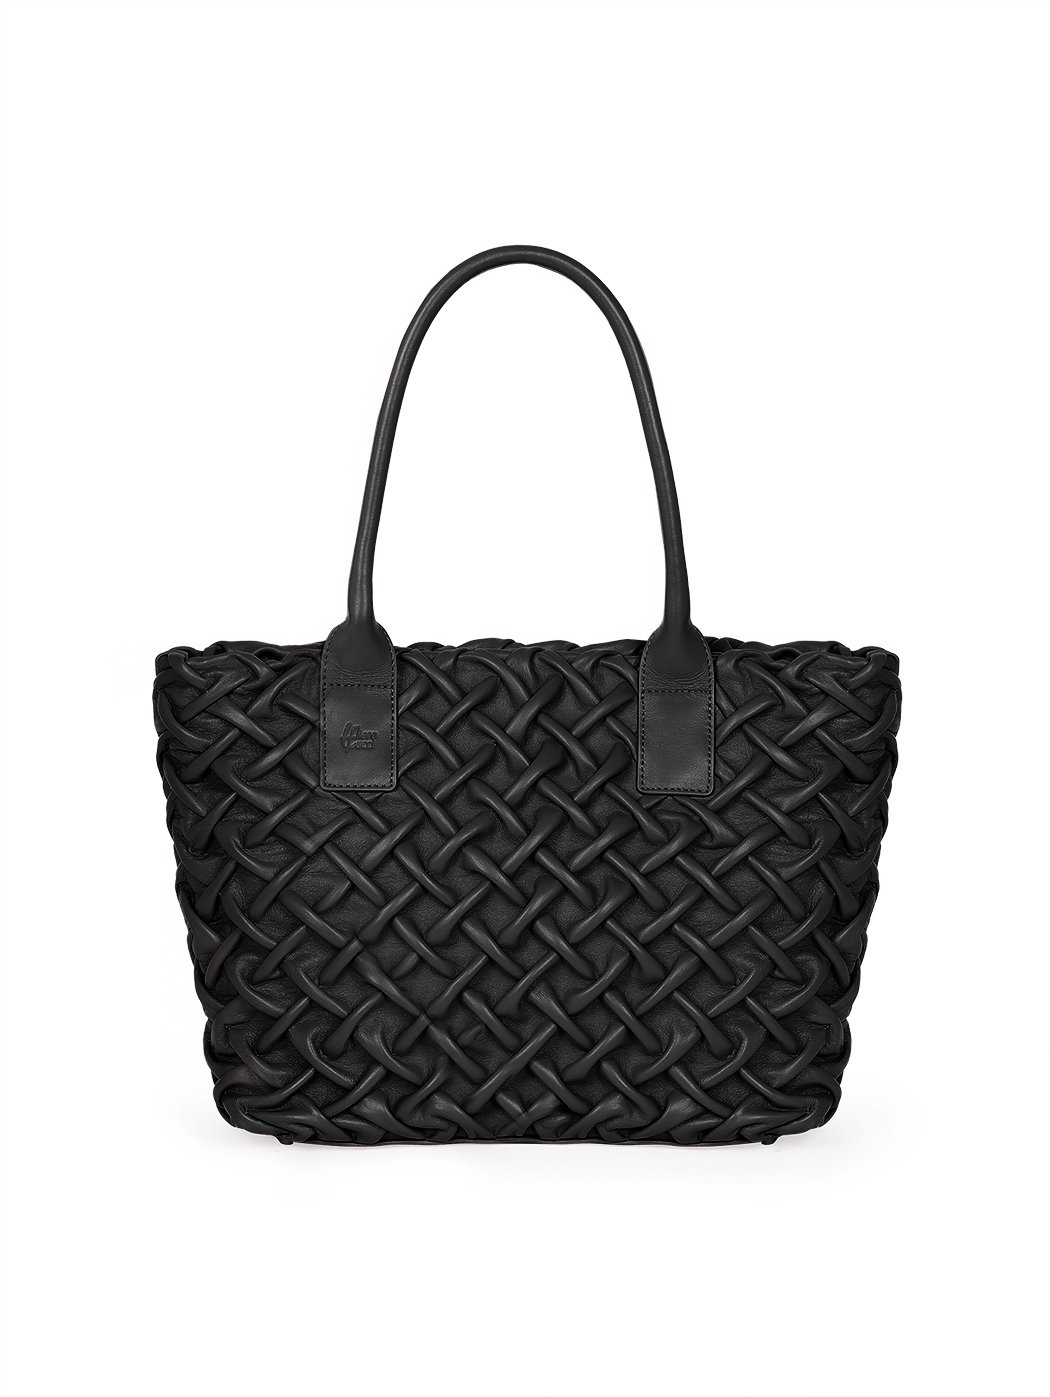 Quilted Weave Leather Satchel Tote Bag Black